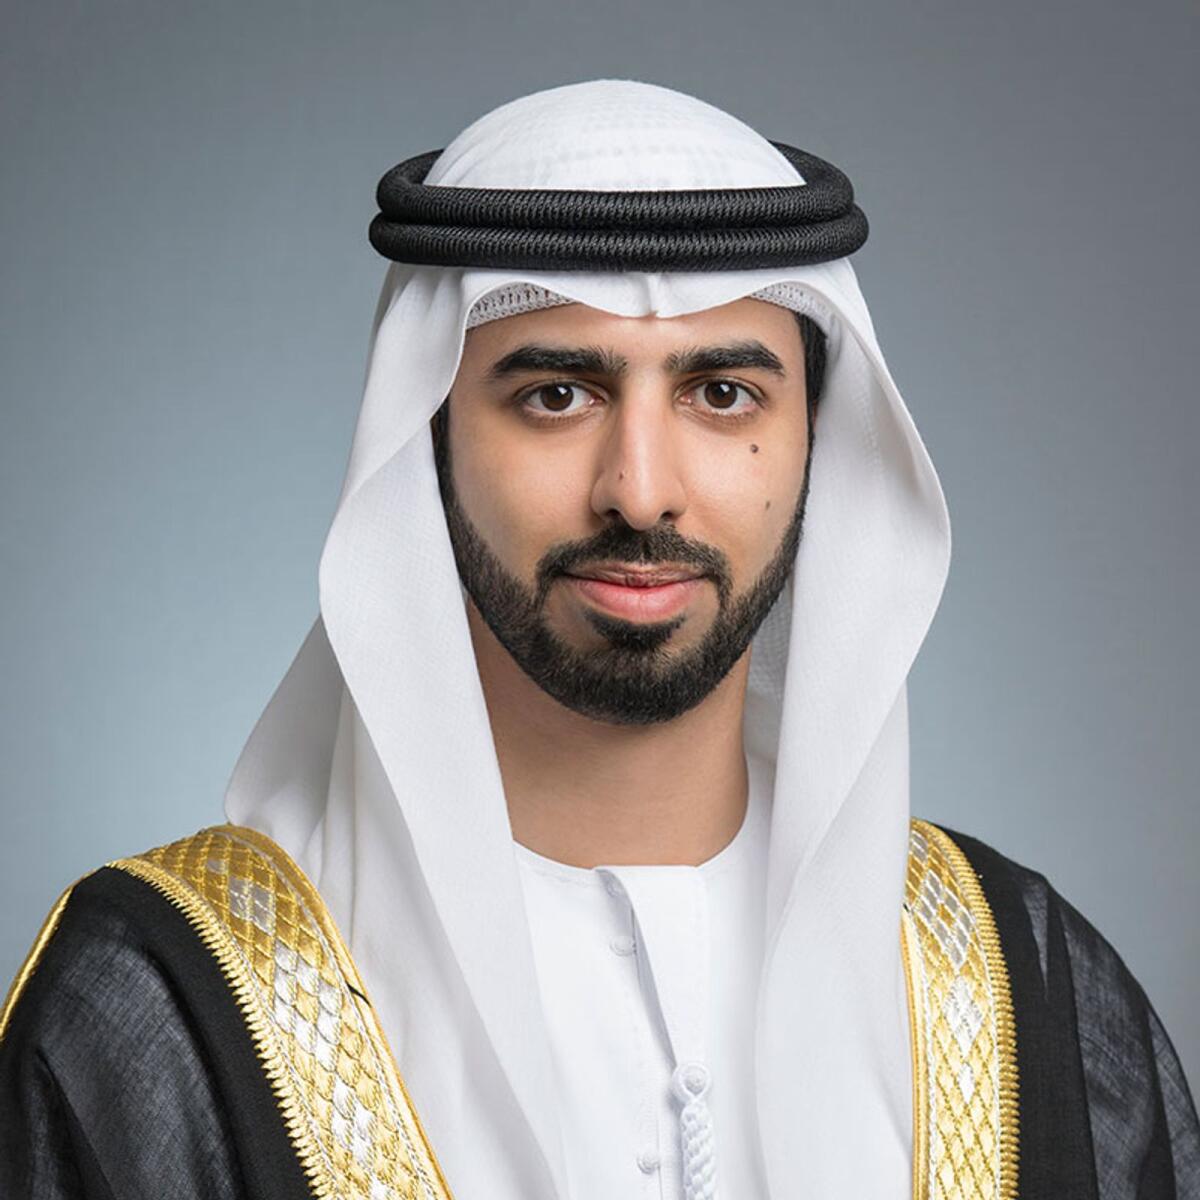 Omar Sultan Al Olama, Minister of State for Artificial Intelligence, Digital Economy and Remote Work Applications, and Chairman of Dubai Chamber of Digital Economy.